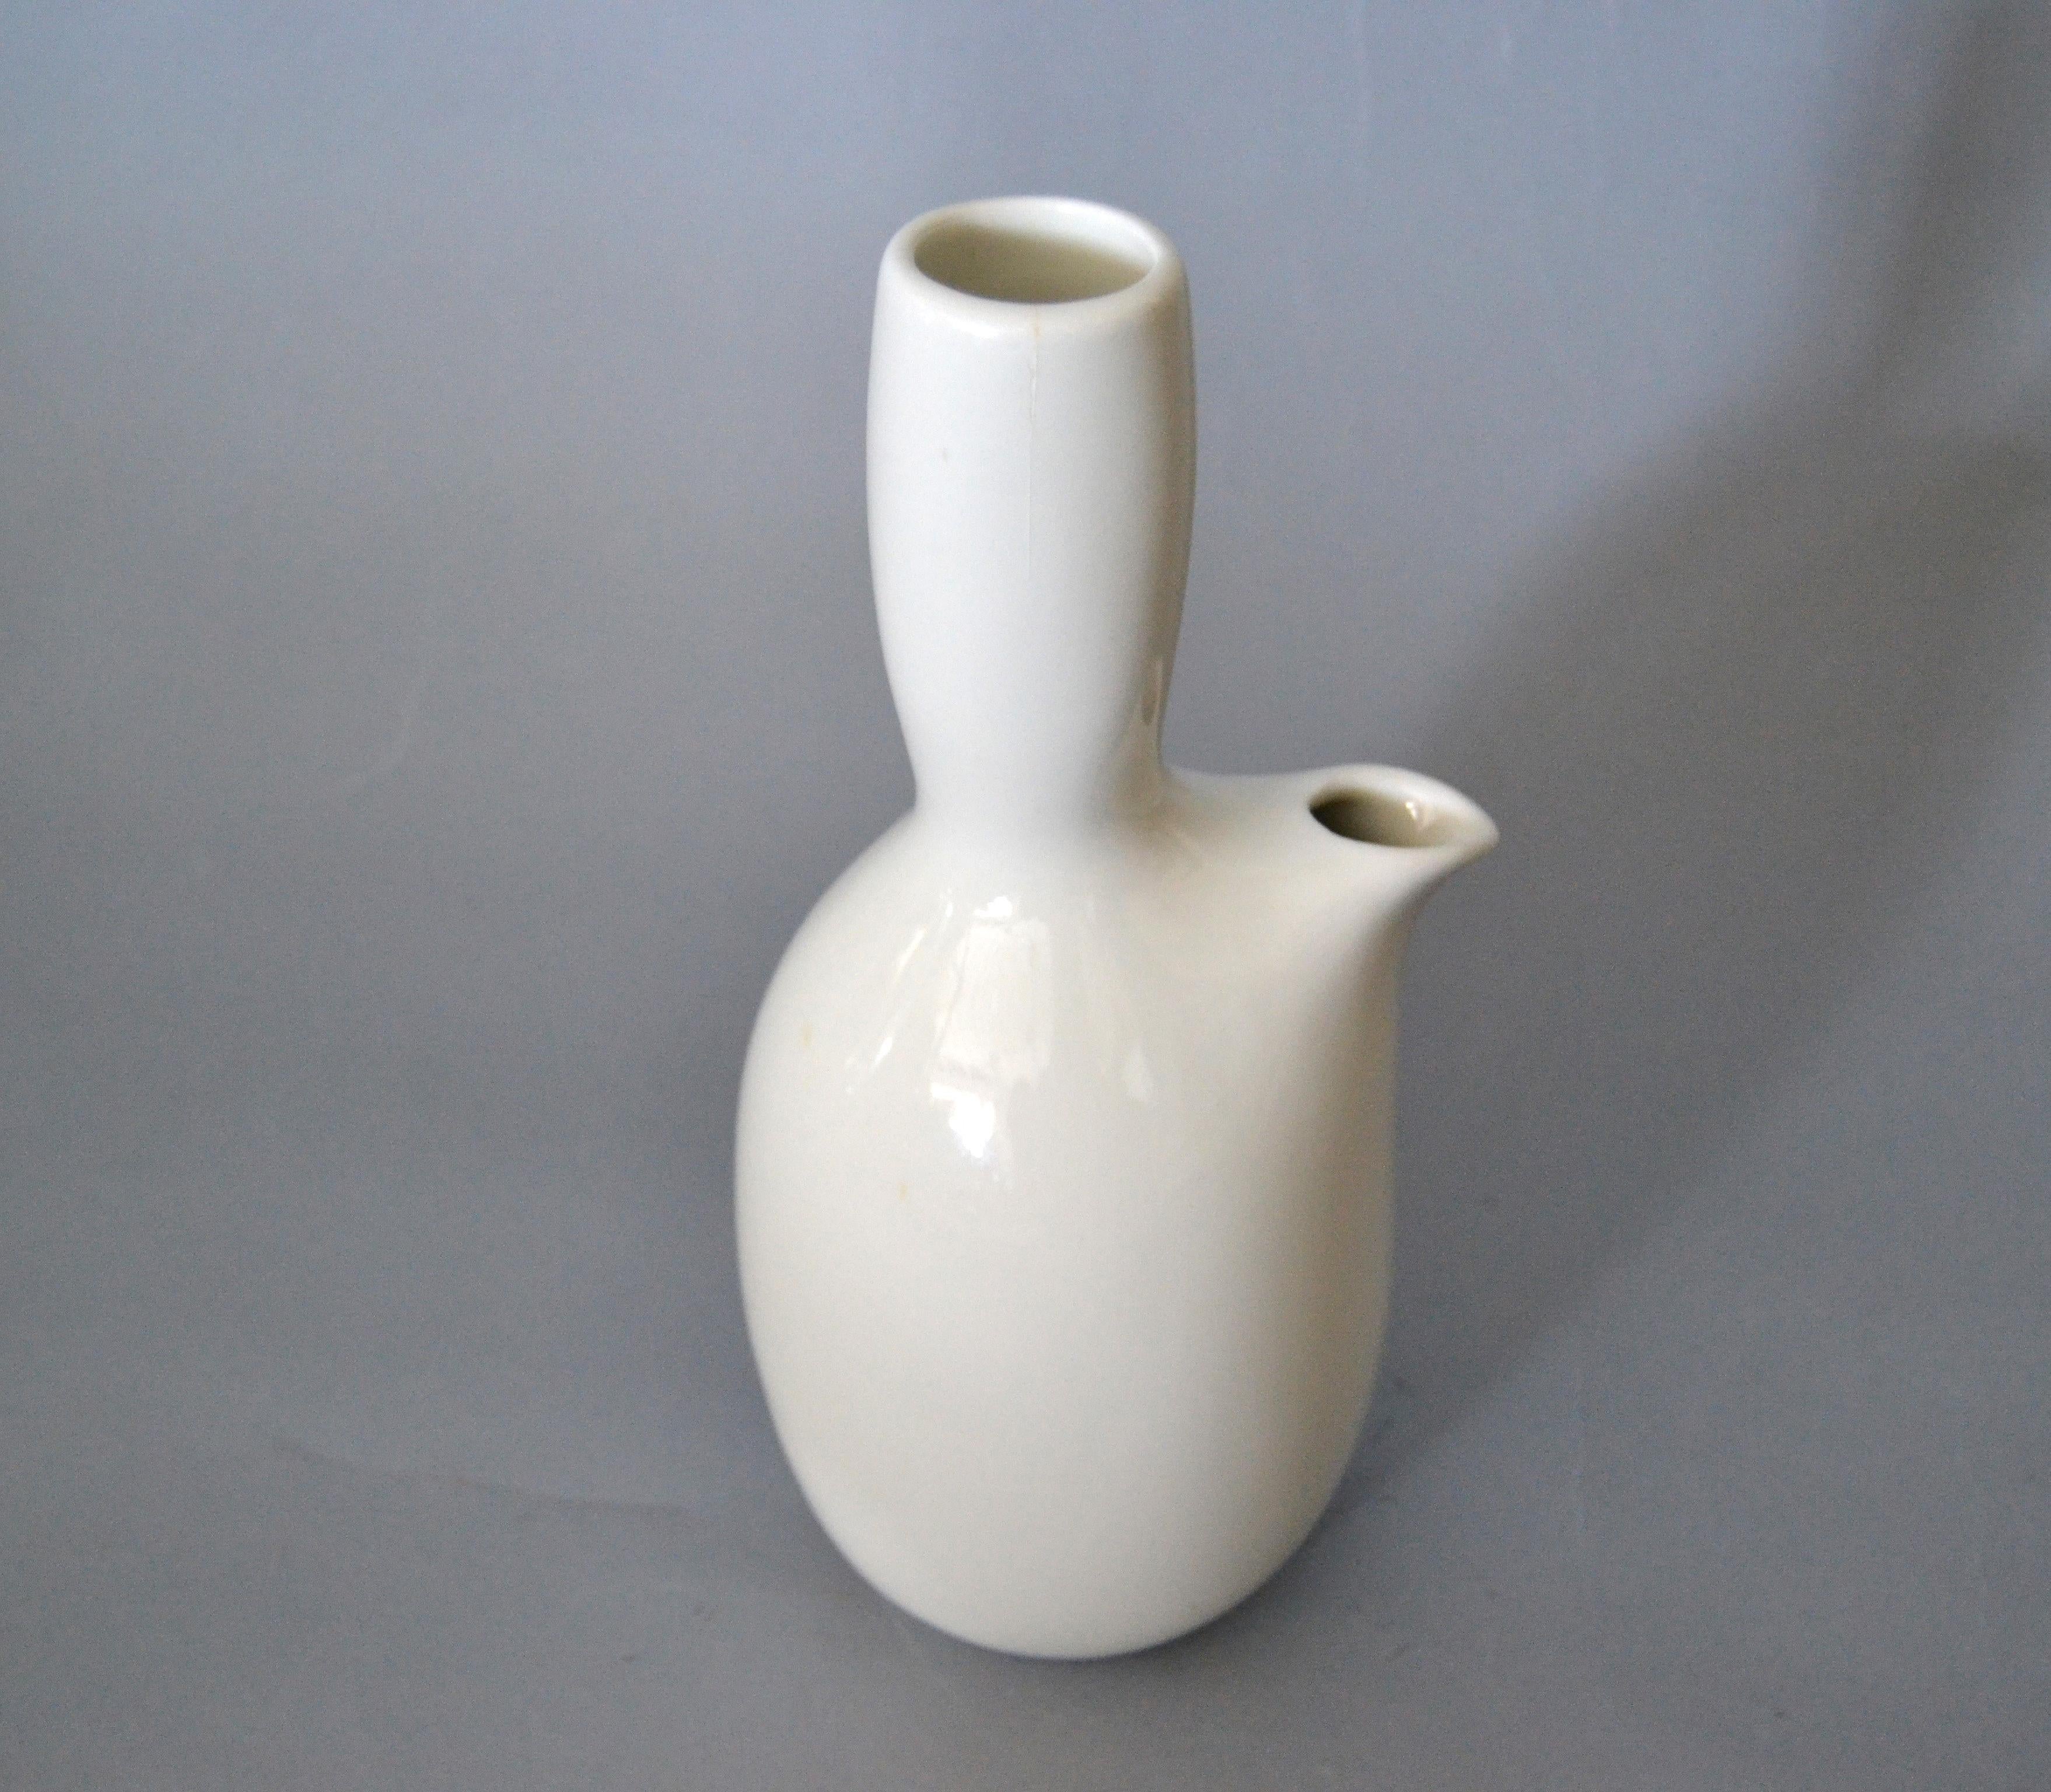 American Modern Iroquois White Porcelain Carafe Russel Wright for Bauer Pottery 3